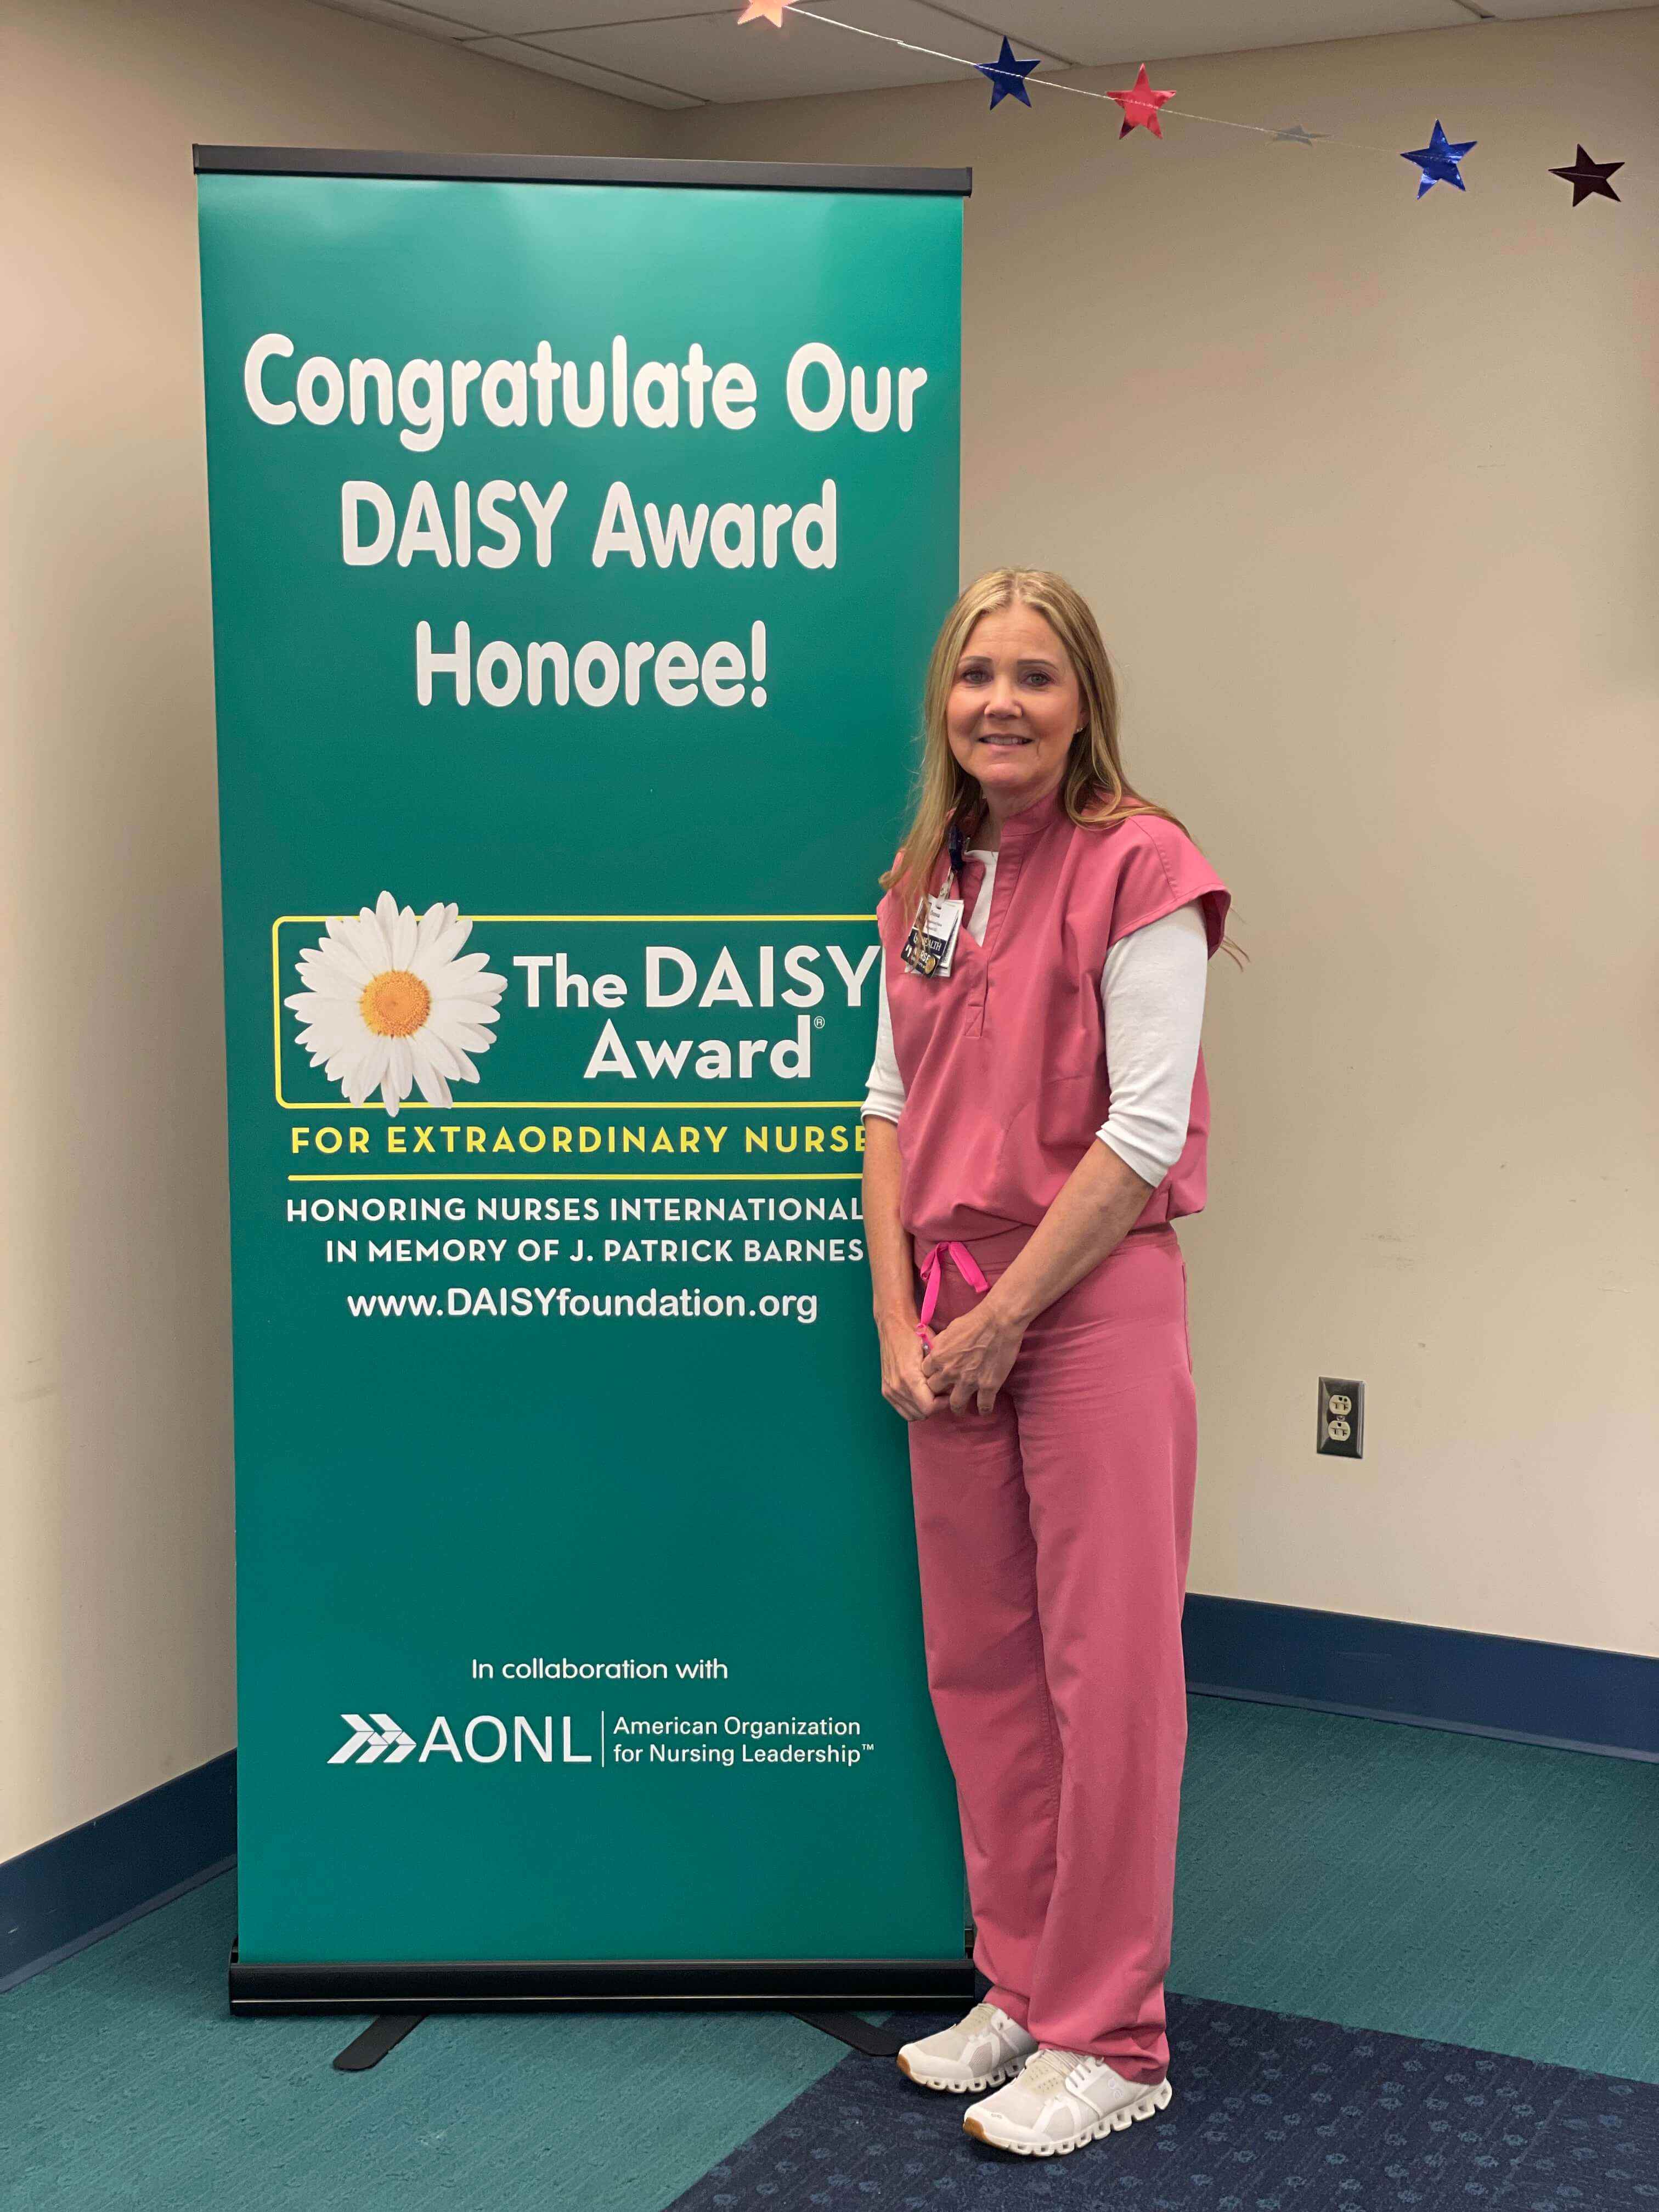 Donna Ward, R.N., a nurse in the neonatal intensive care unit, was nominated for a DAISY Award.